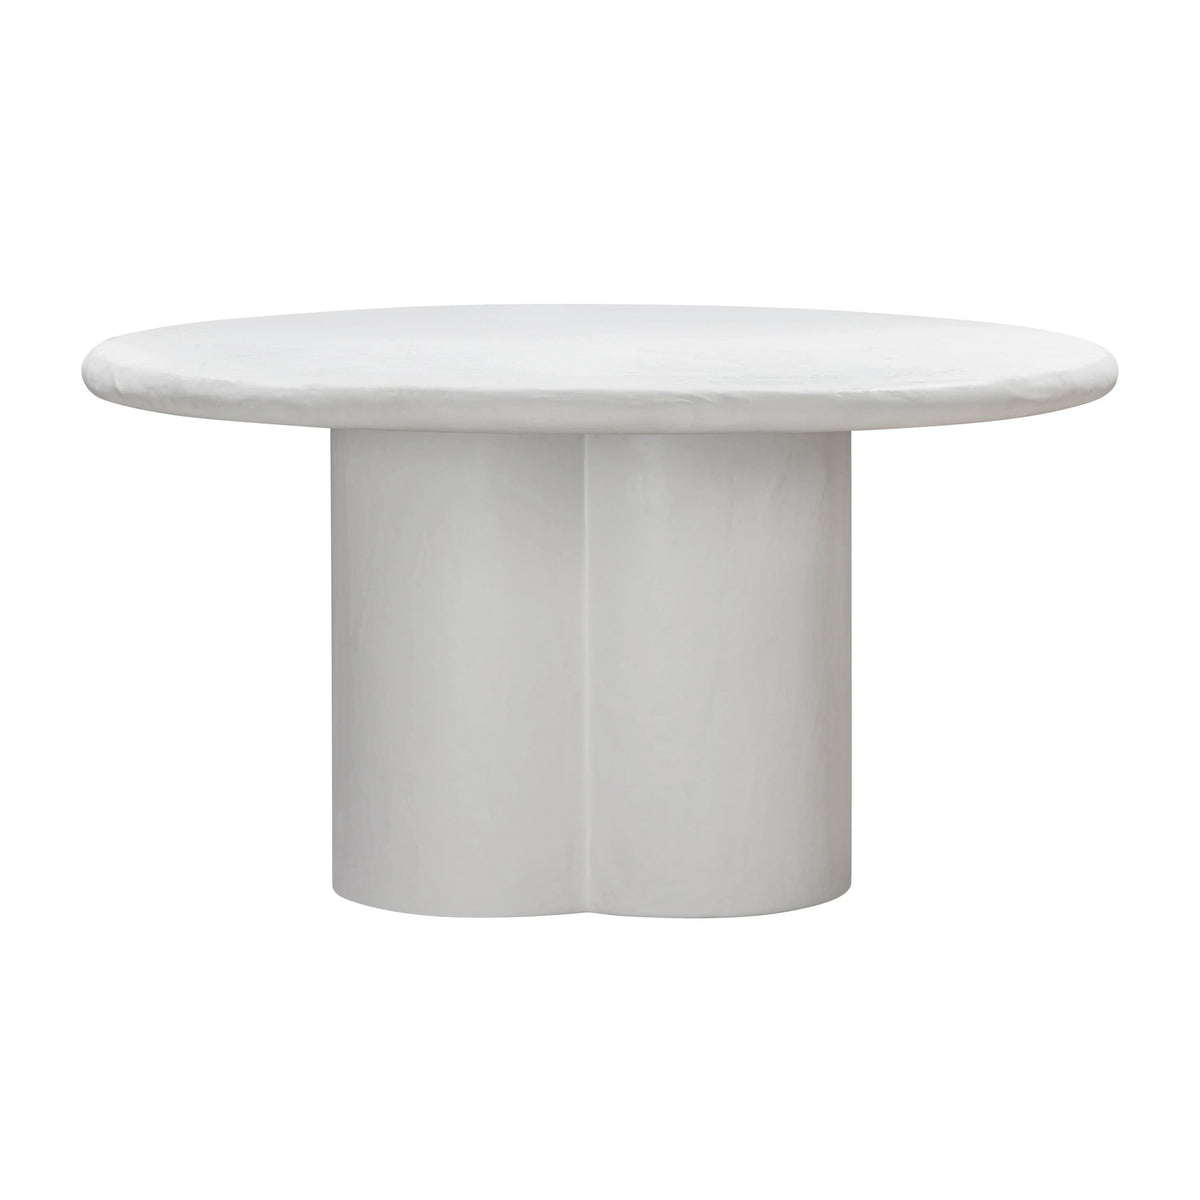 Erika 59” Indoor/Outdoor White Faux Plaster Round Dining Table - Luxury Living Collection